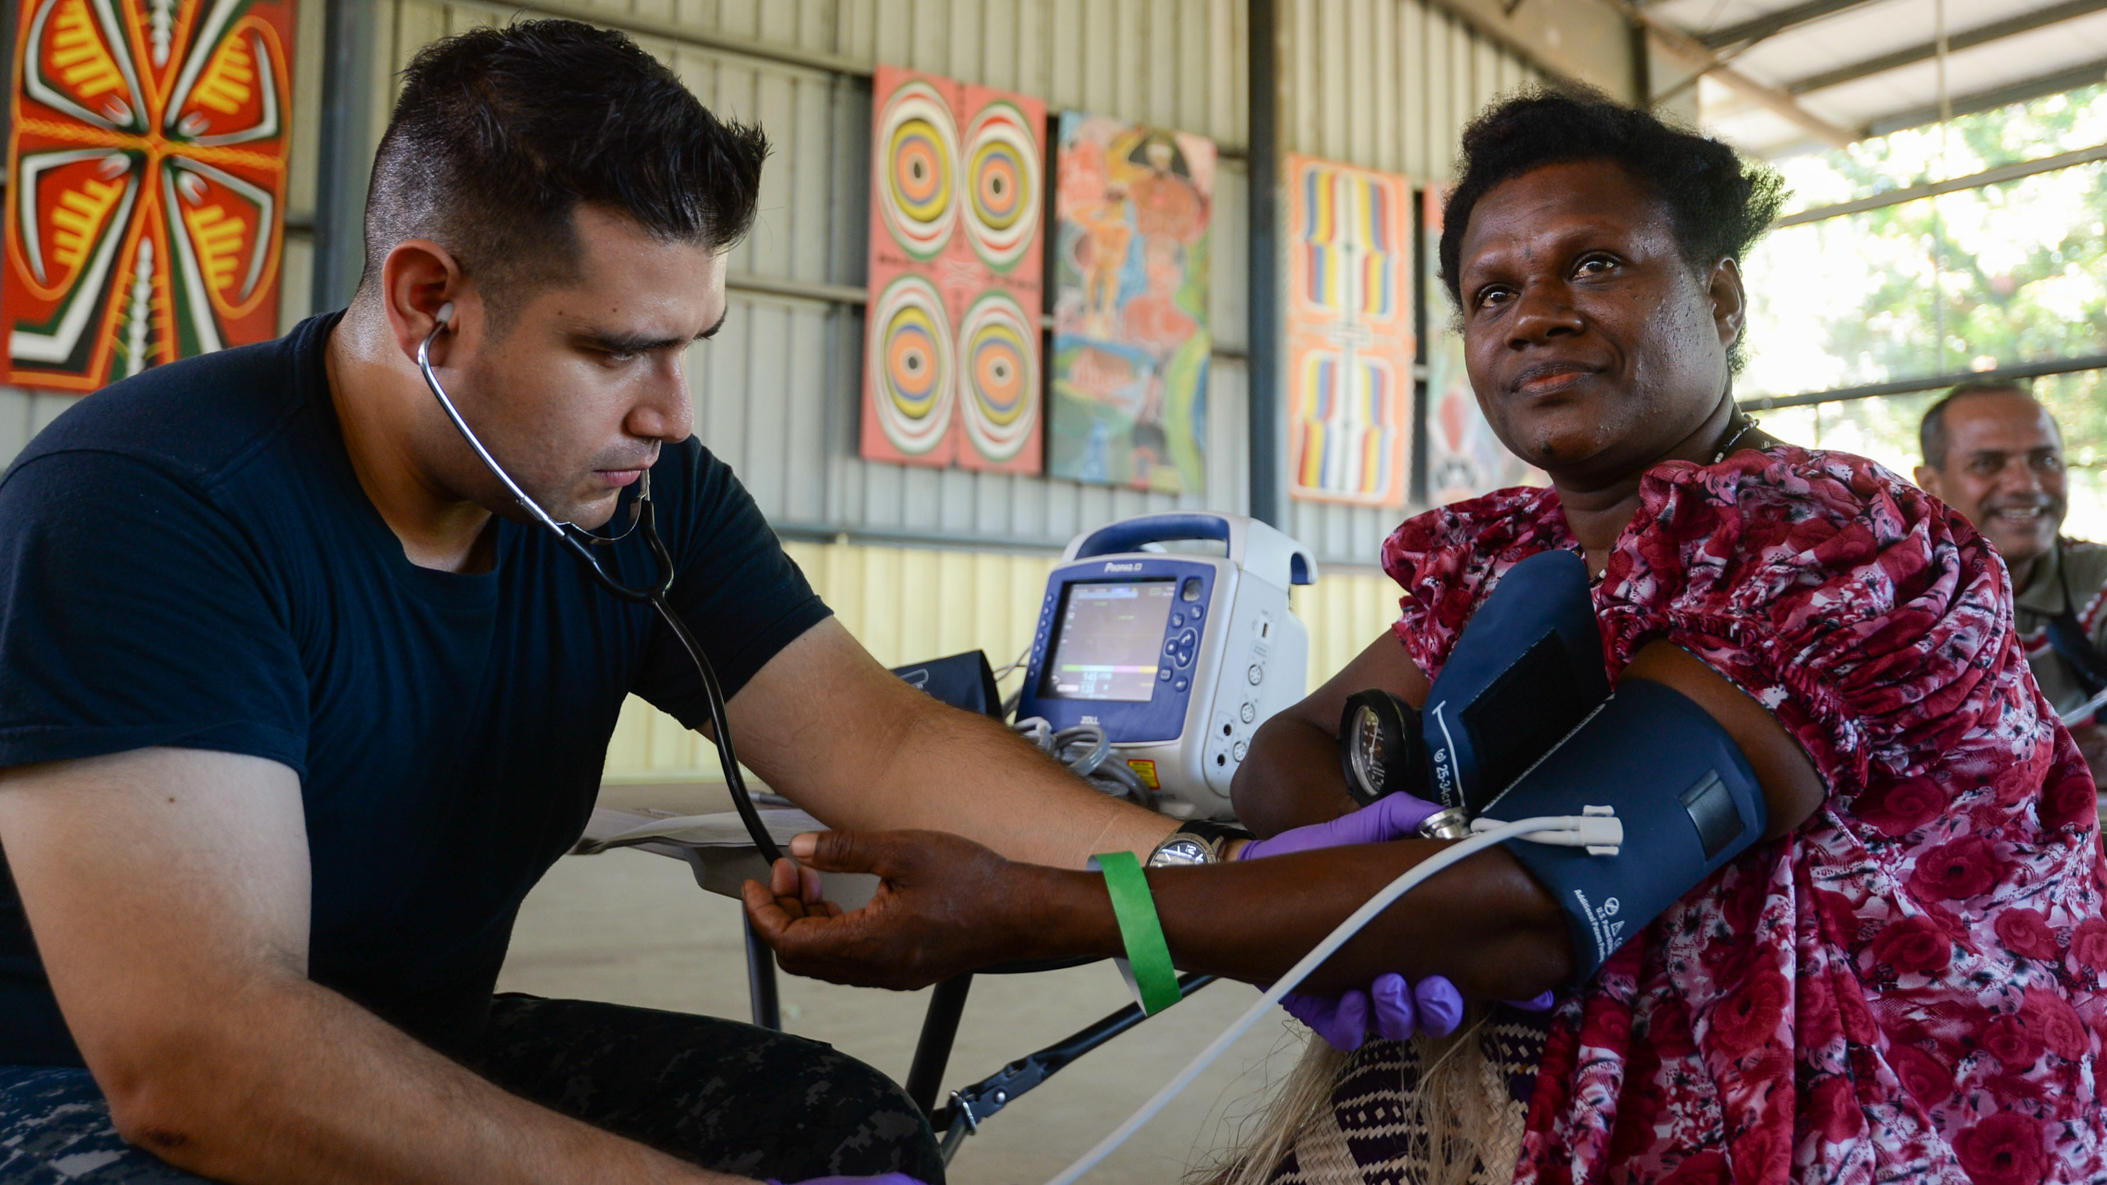 Clinician taking blood pressure of a woman in a rural setting